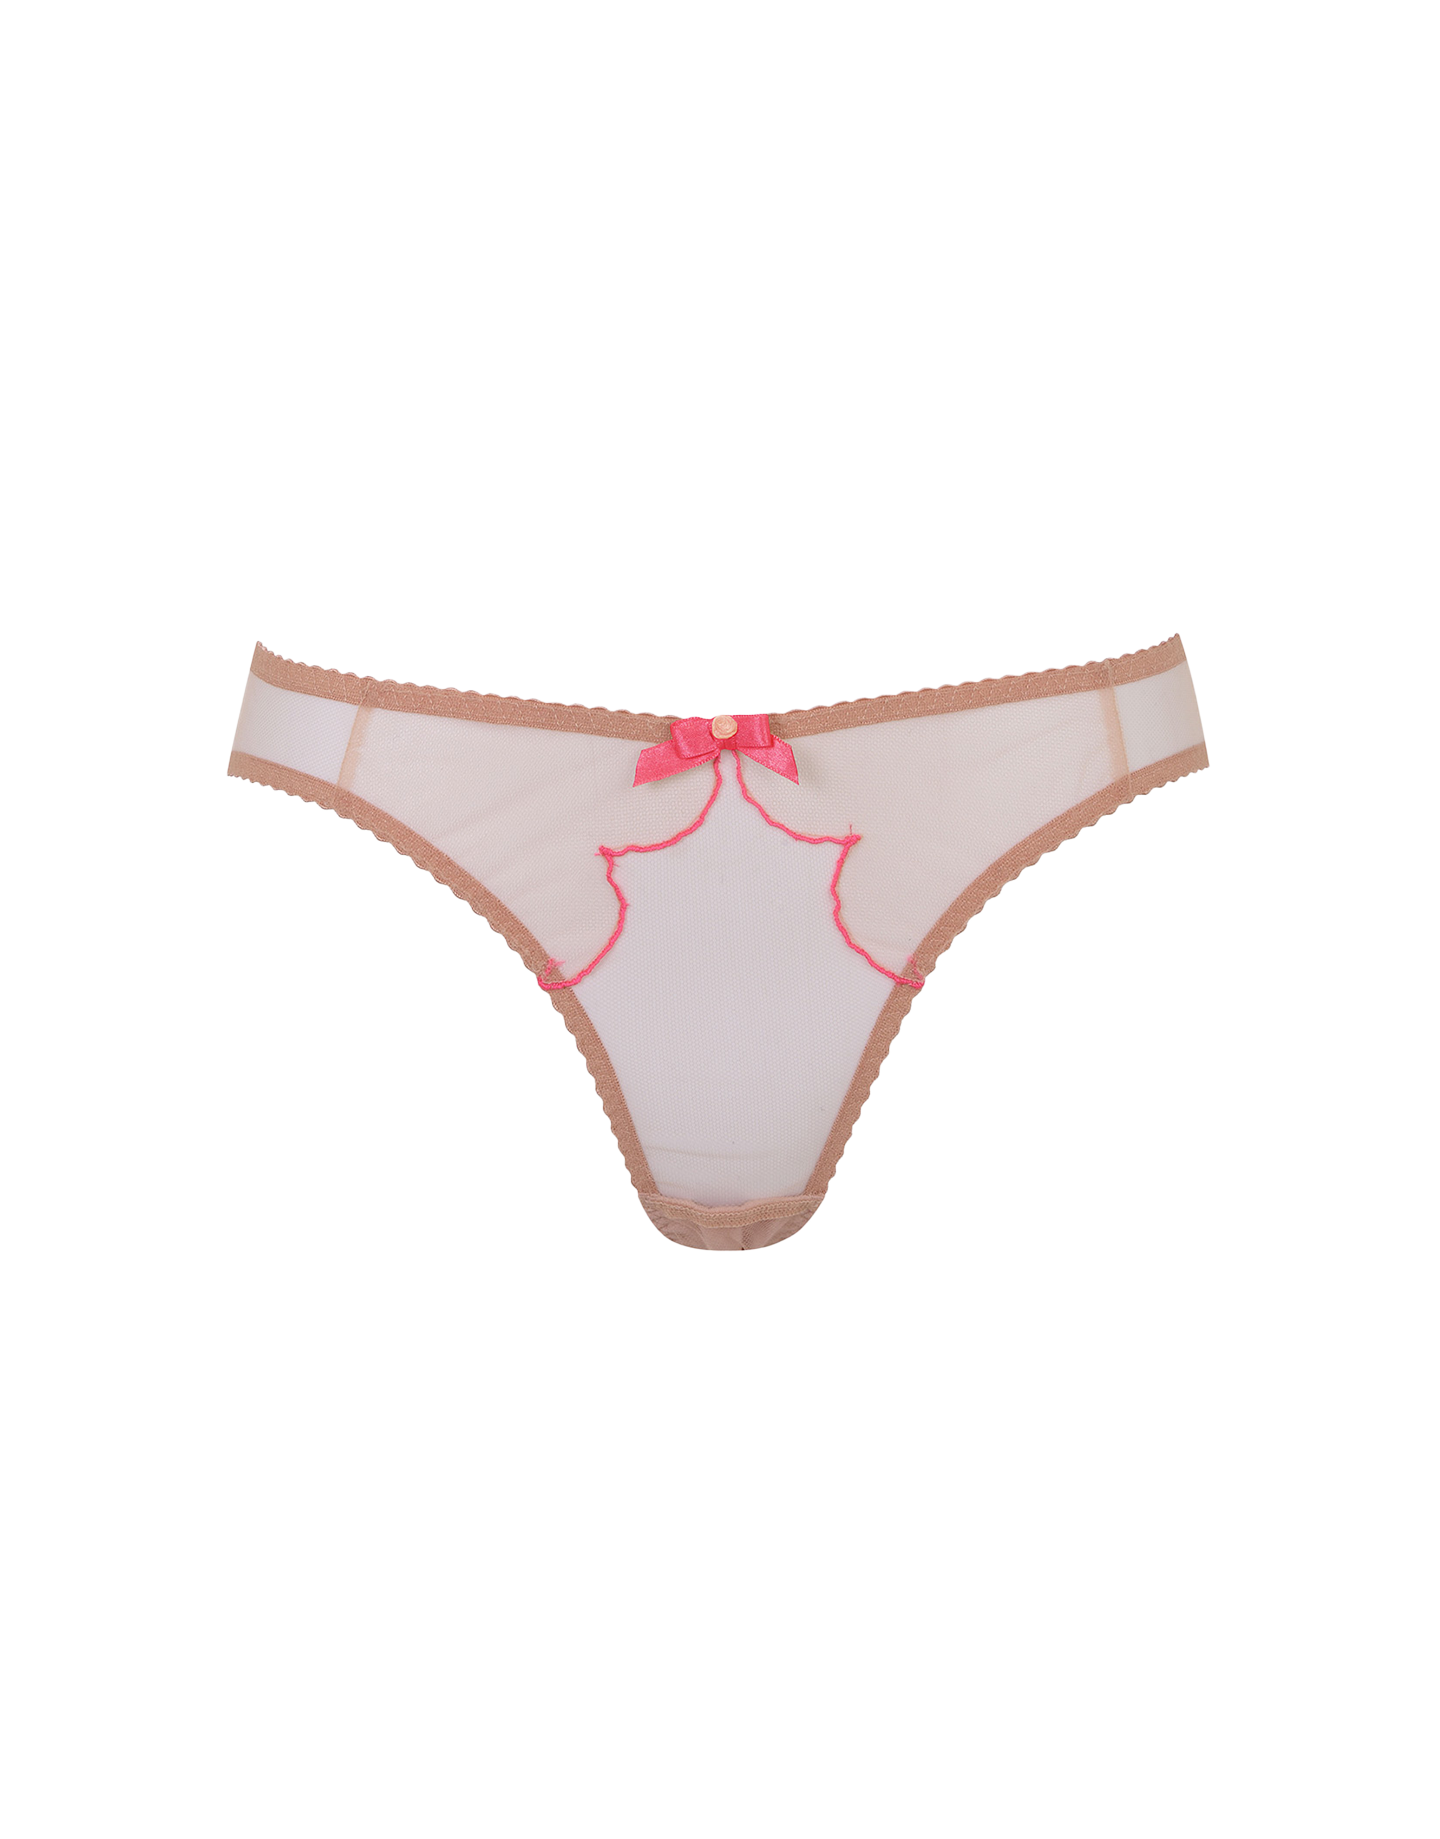 Lorna Full Brief in Nude/Pink | By Agent Provocateur